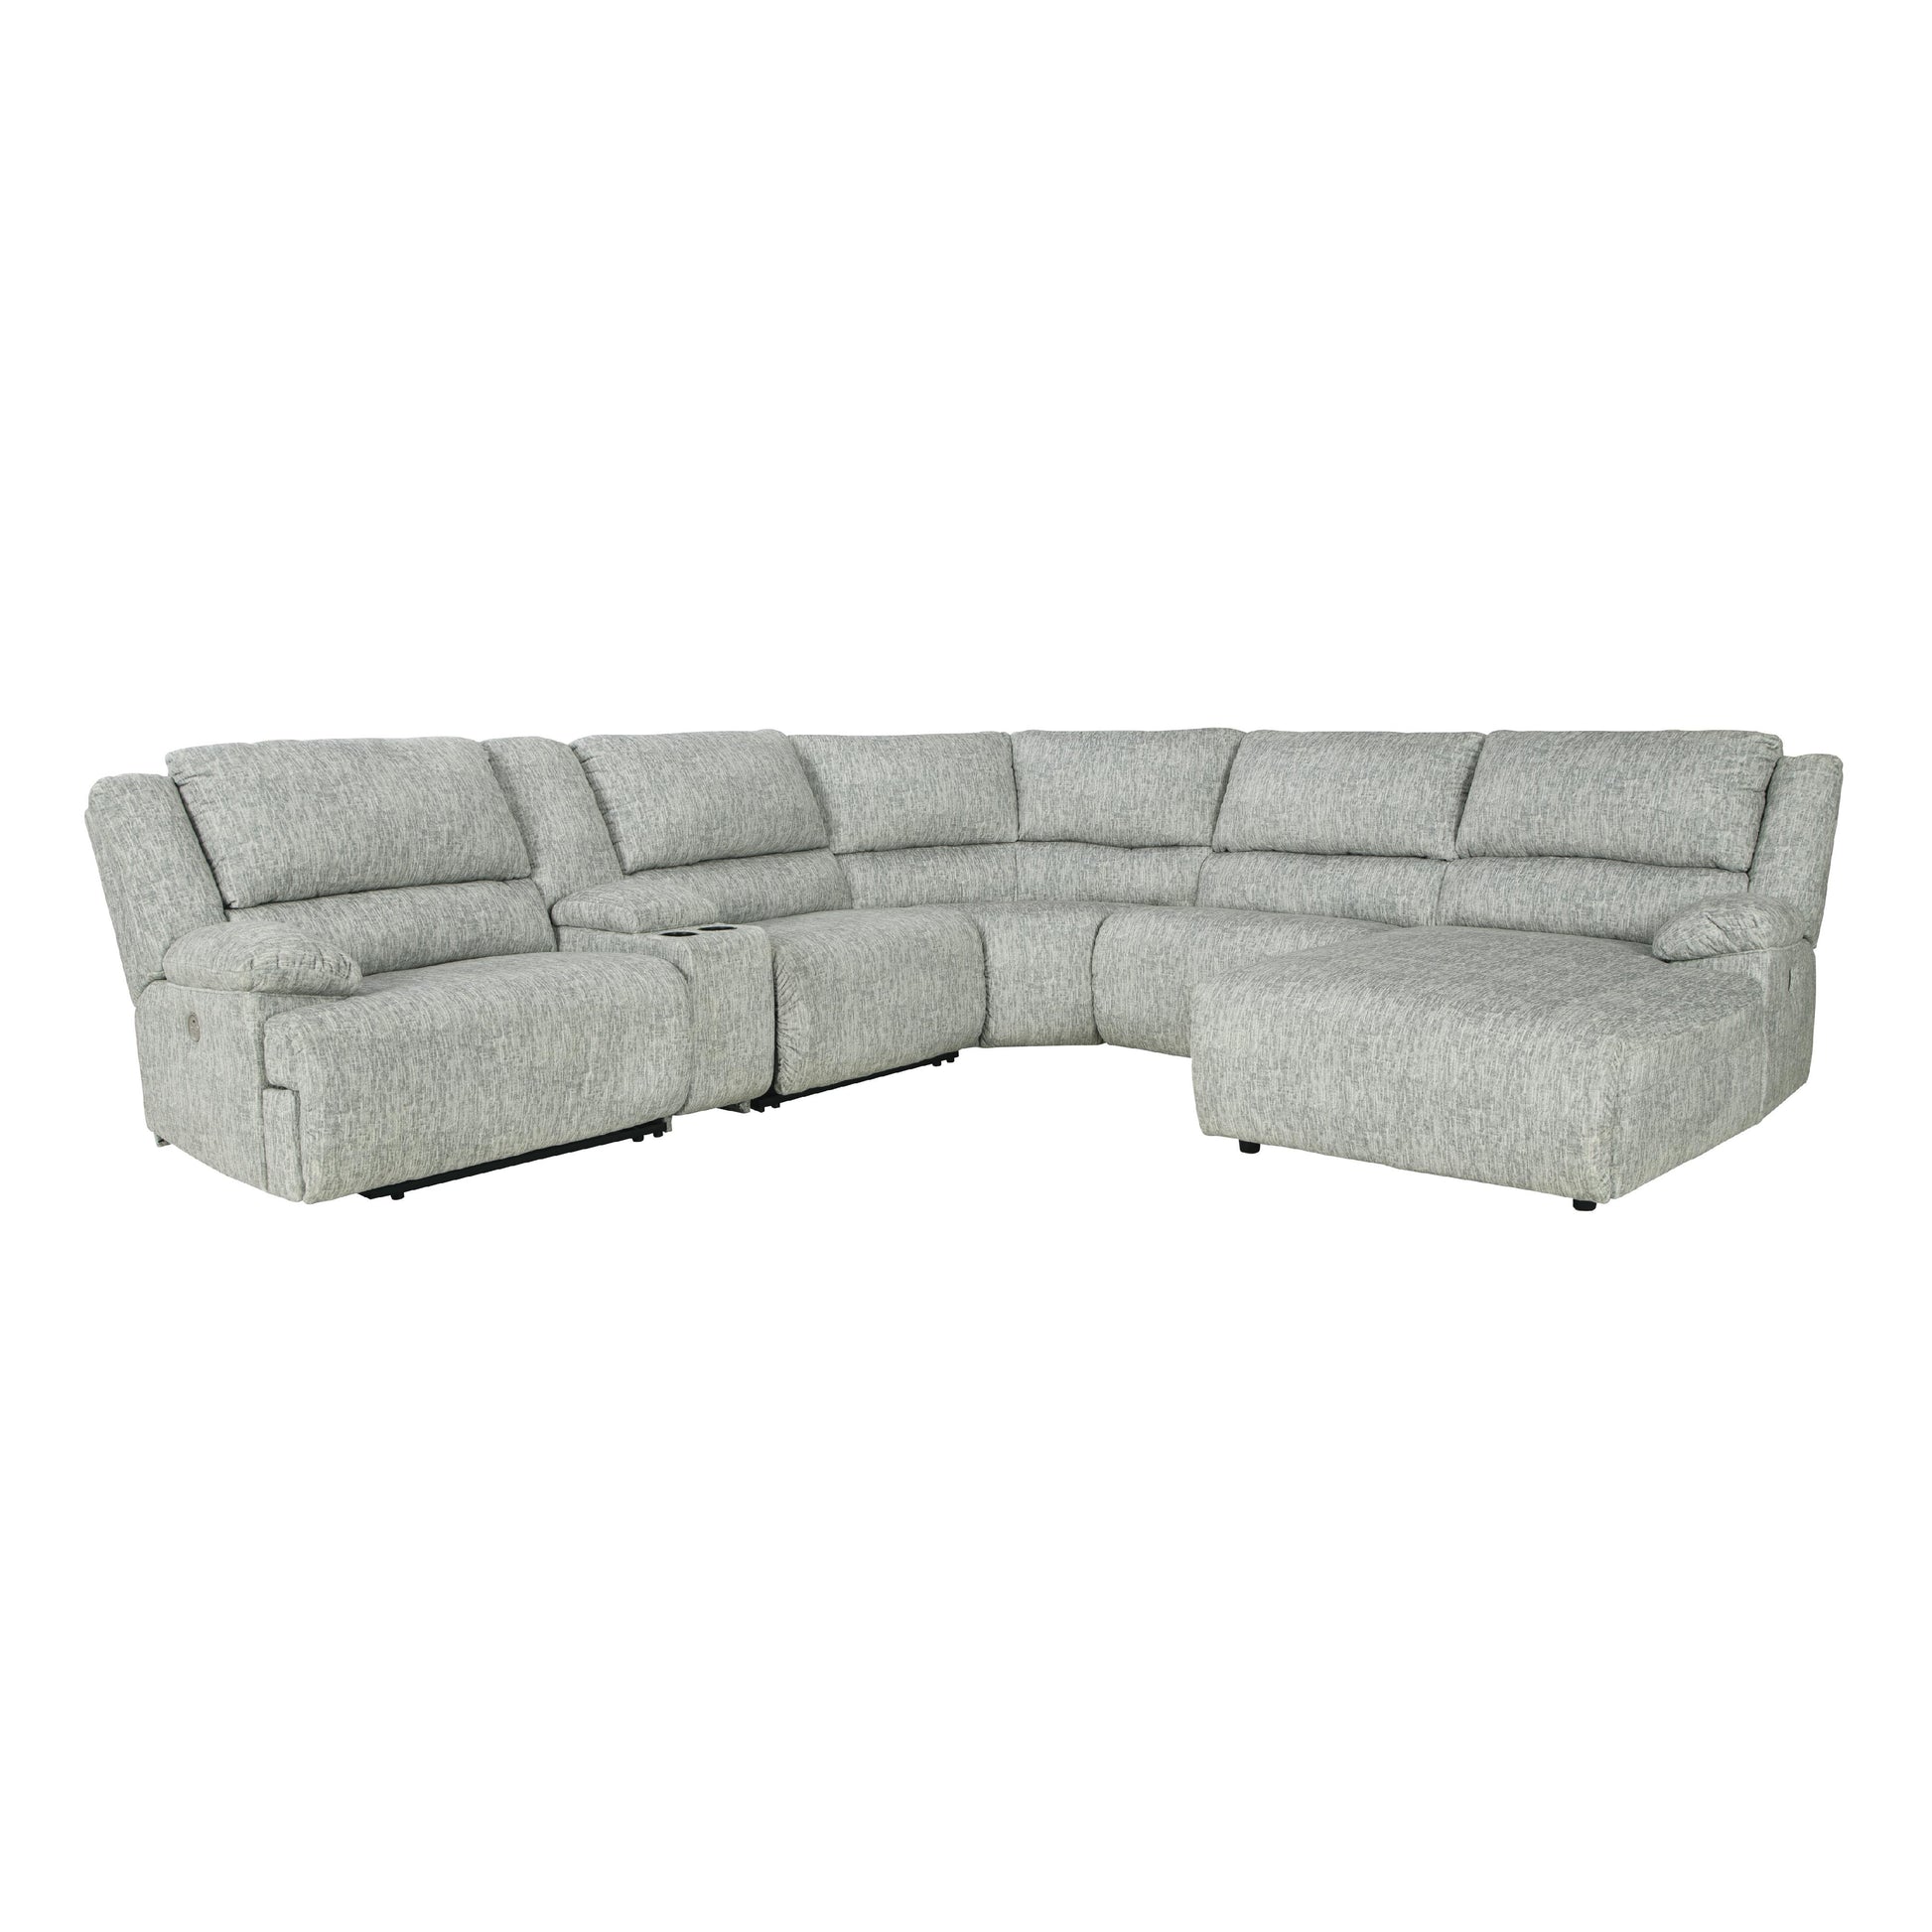 Signature Design by Ashley McClelland Power Reclining Fabric 6 pc Sectional 2930258/2930257/2930219/2930277/2930246/2930297 IMAGE 1